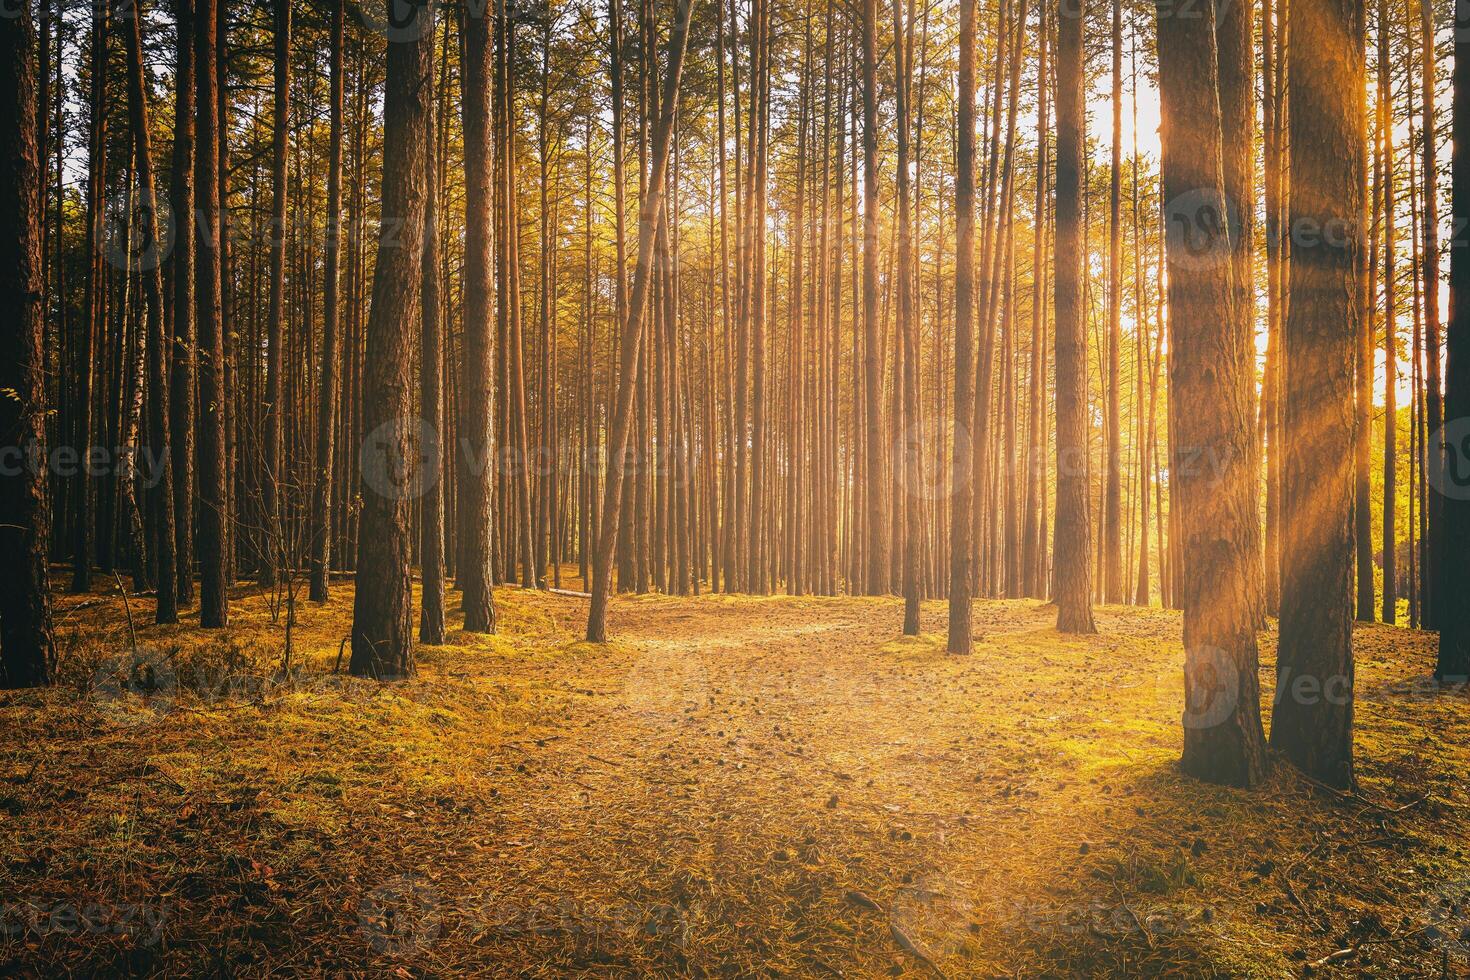 Sunbeams illuminating the trunks of pine trees at sunset or sunrise in an autumn pine forest. Aesthetics of vintage film. photo